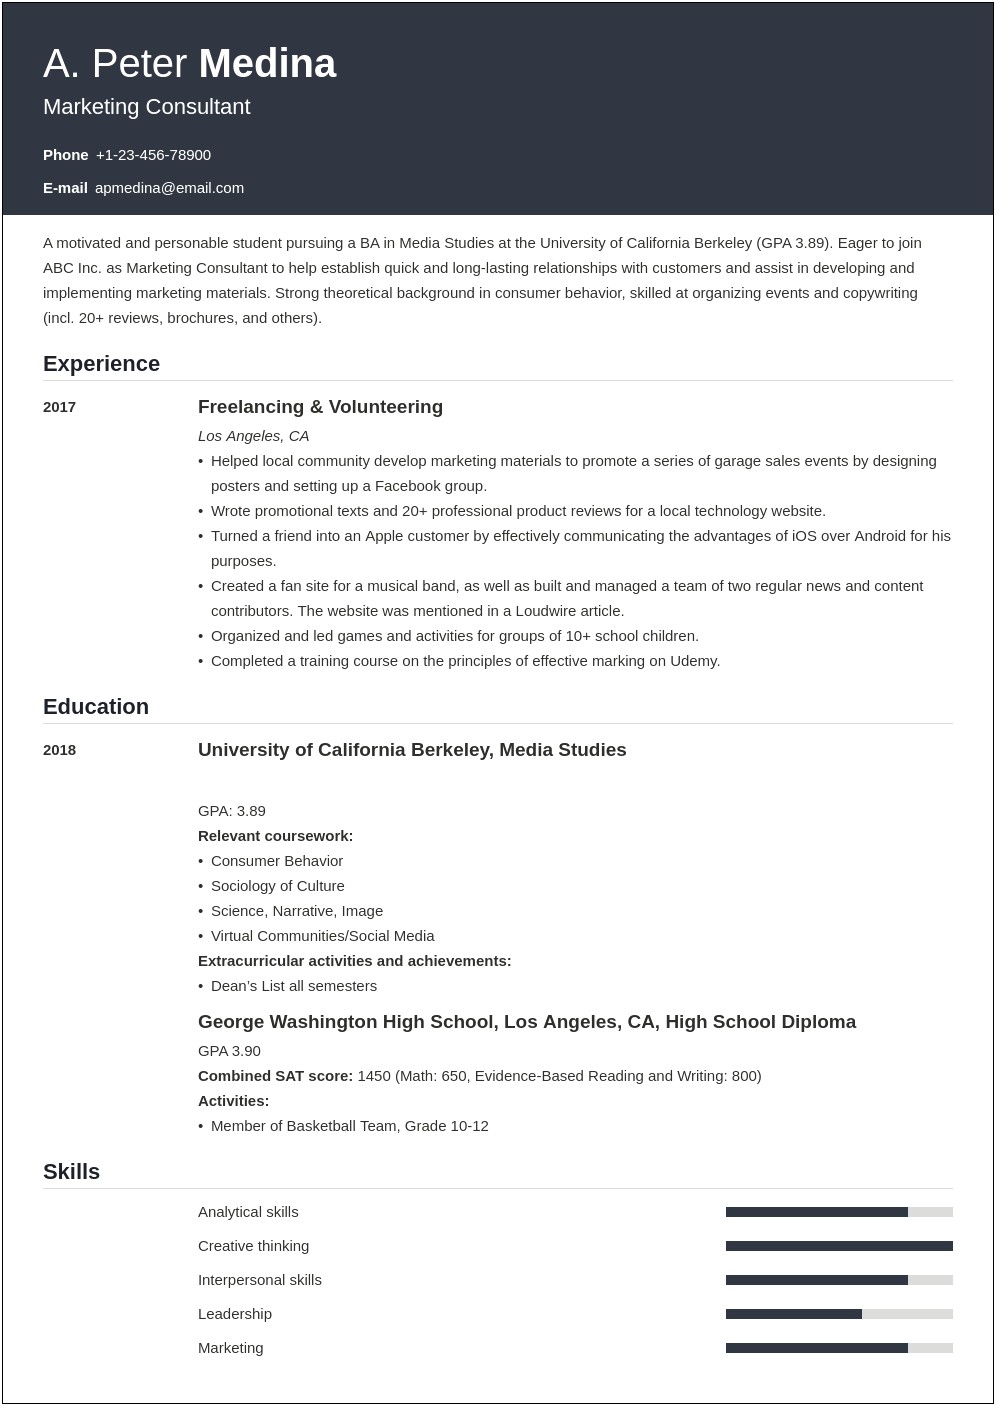 Resume Objective For Recent College Graduate